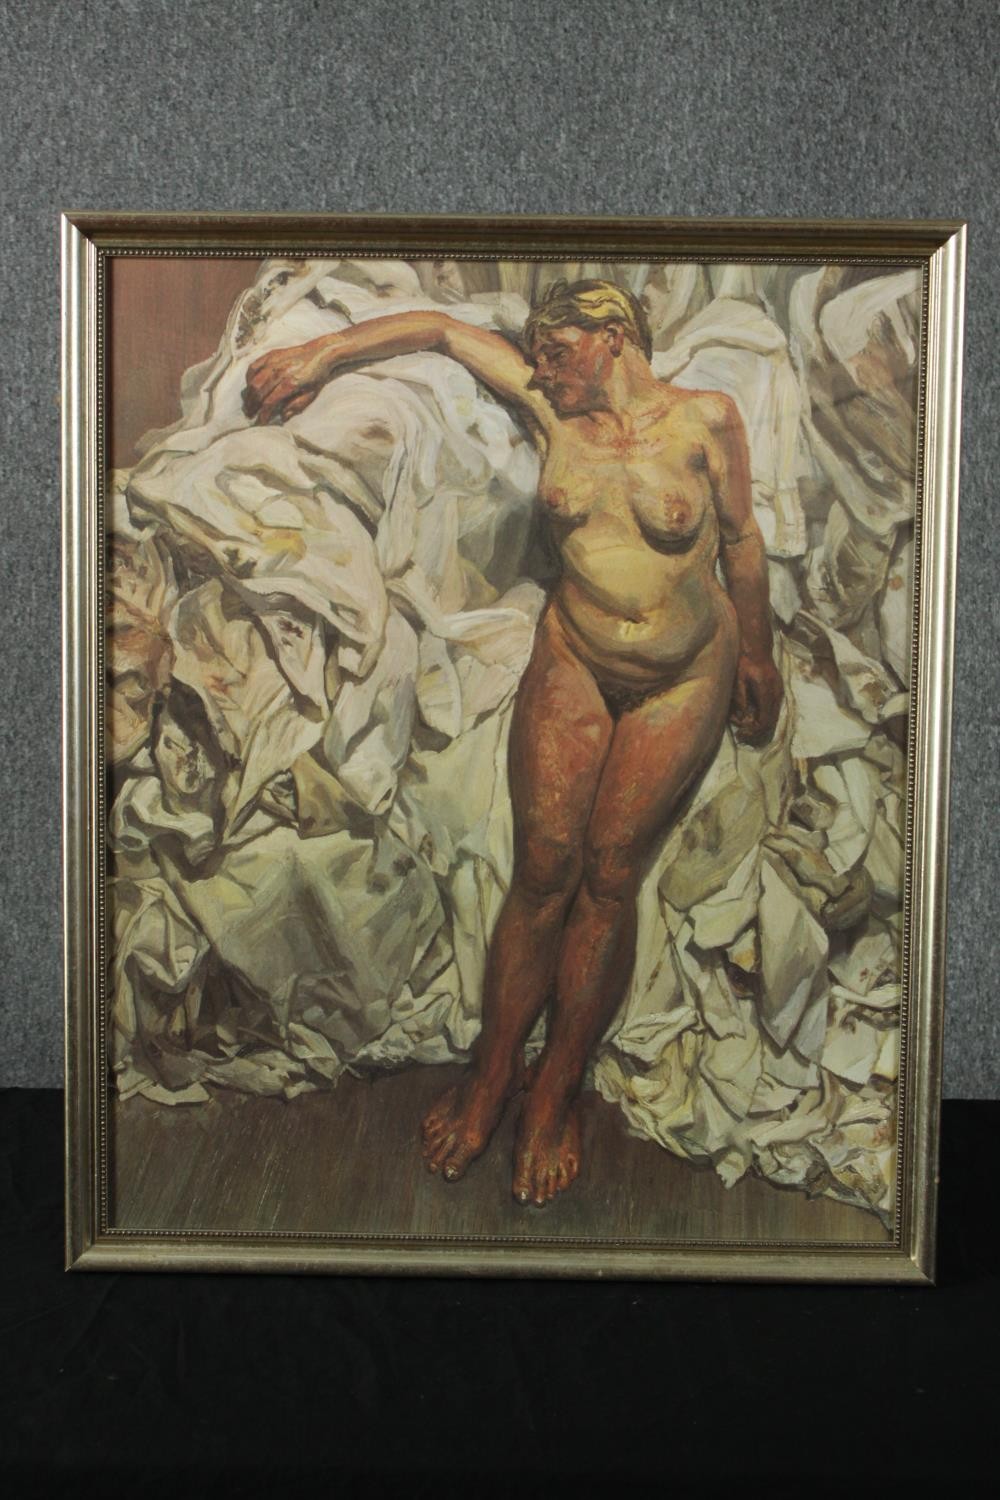 Print. Female nude on sheets. Probably Lucien Freud. Framed. H.66 x W.55 cm. - Image 2 of 3